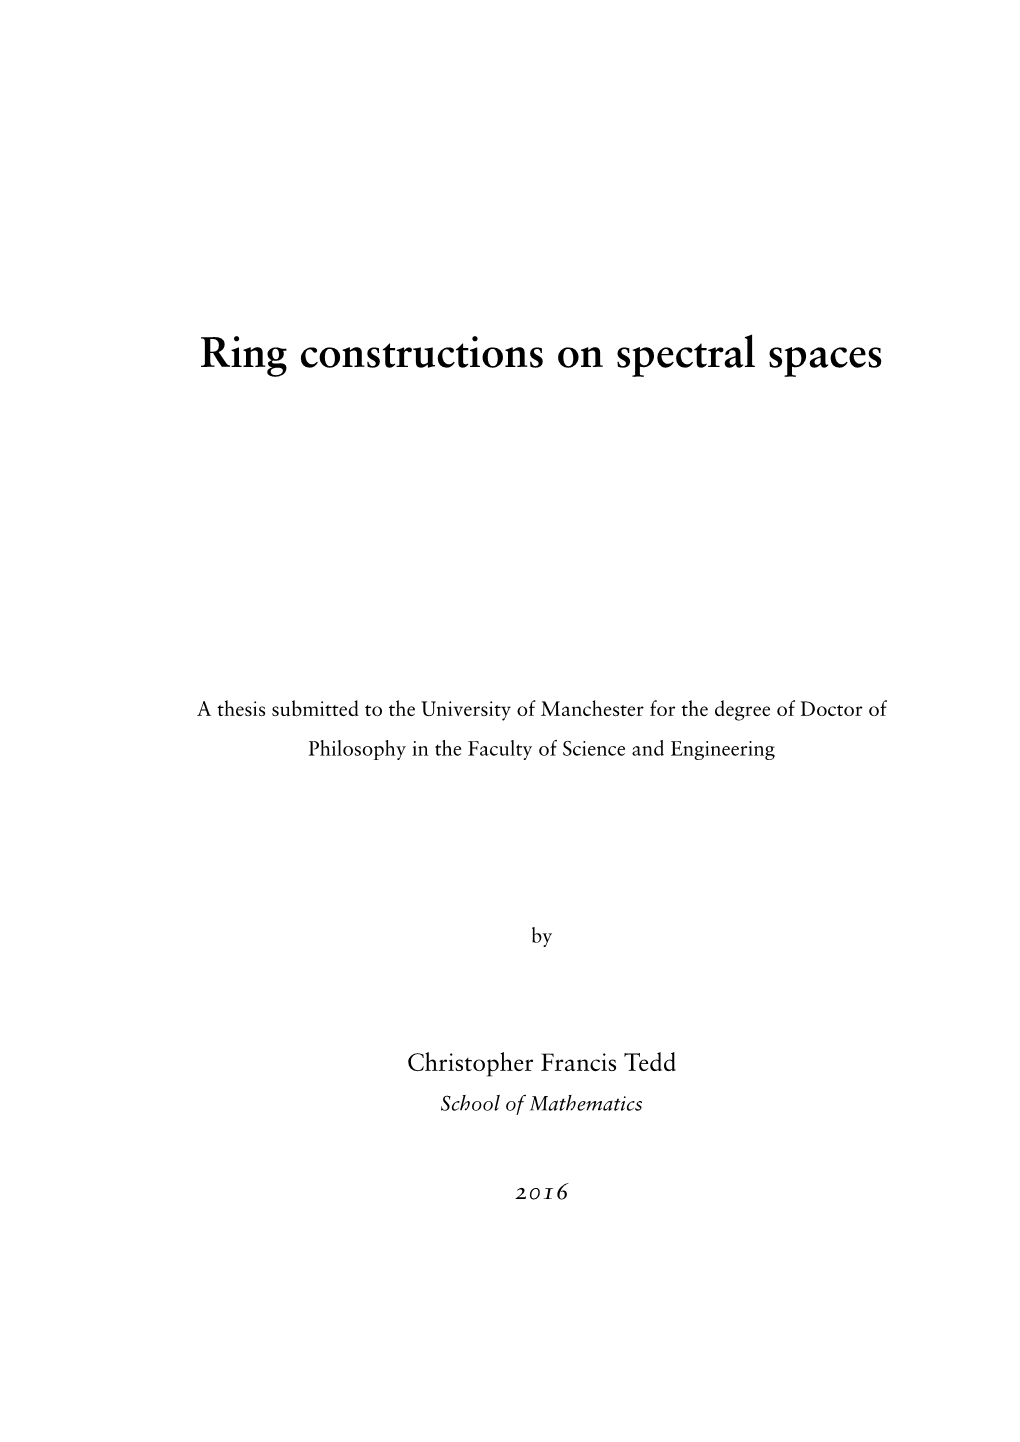 Ring Constructions on Spectral Spaces